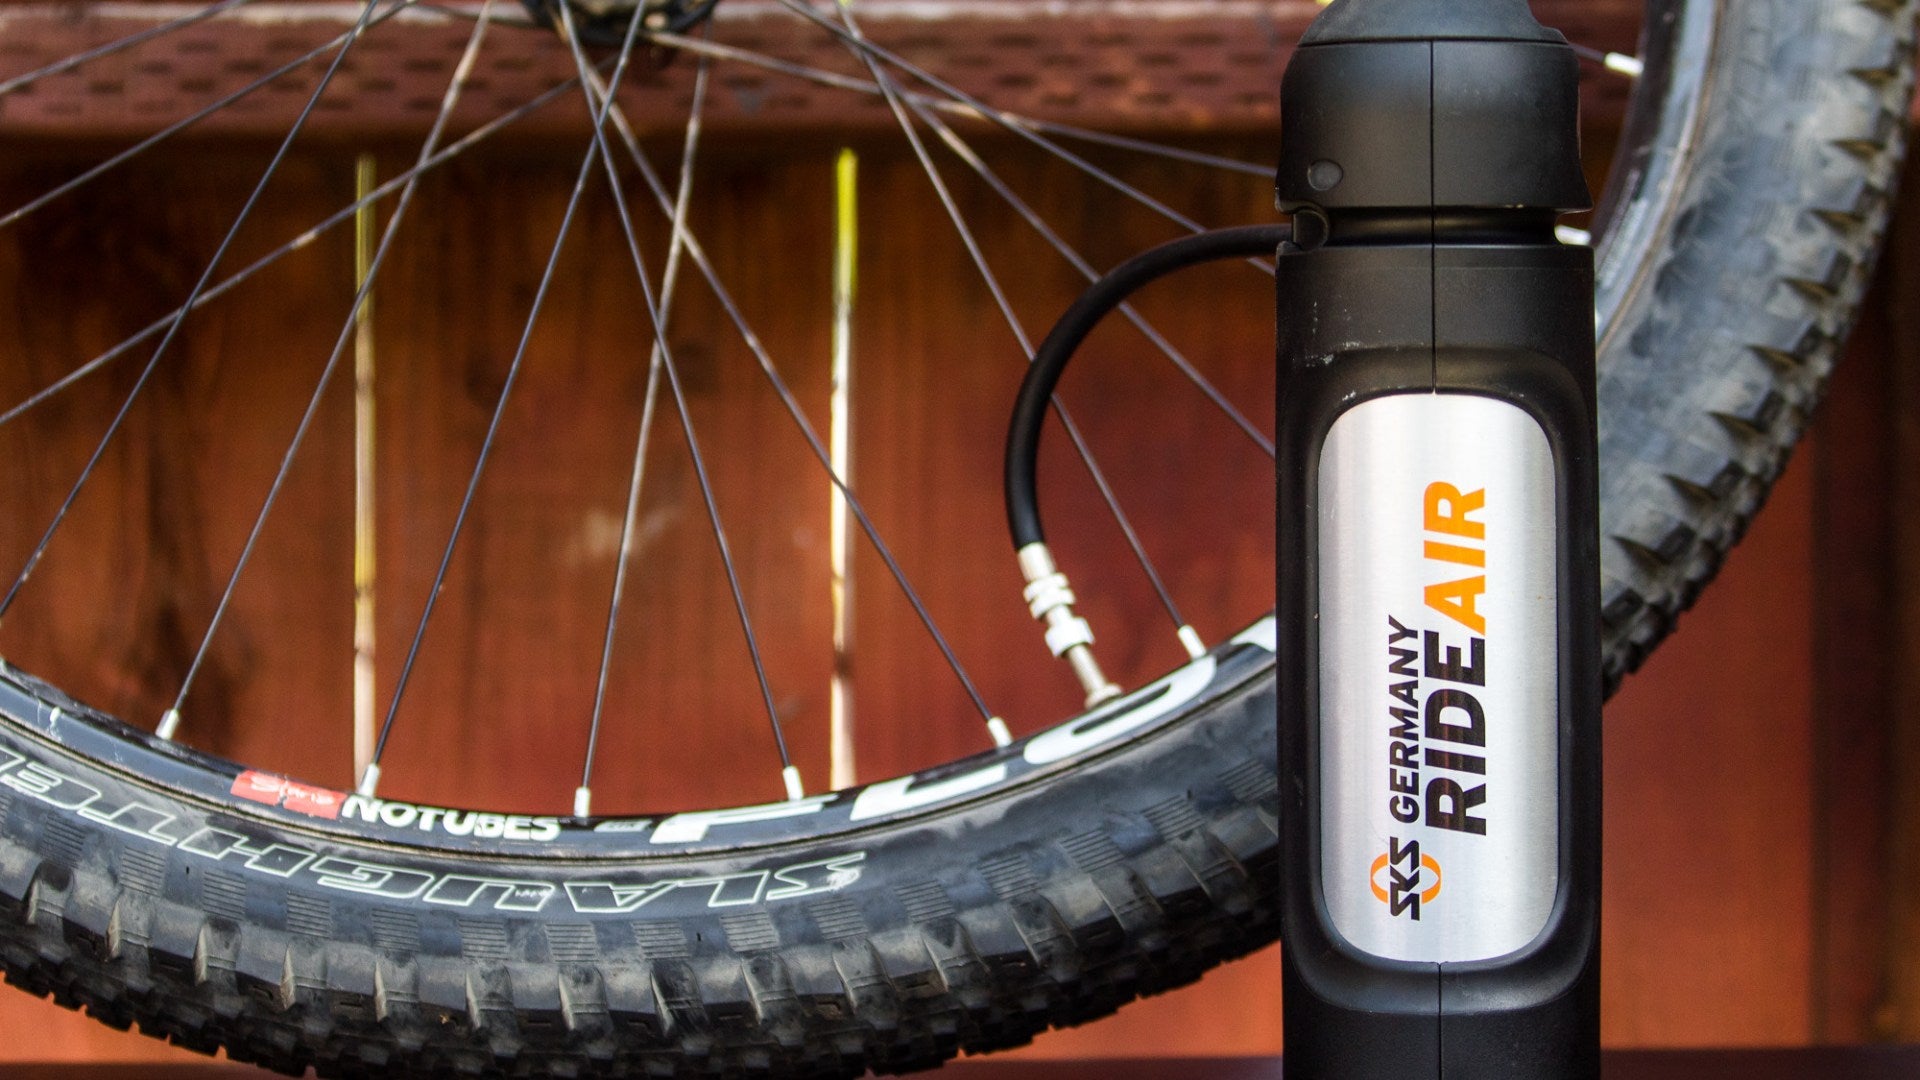 RideAir Tubeless Inflation Bottle - PinkBike Review